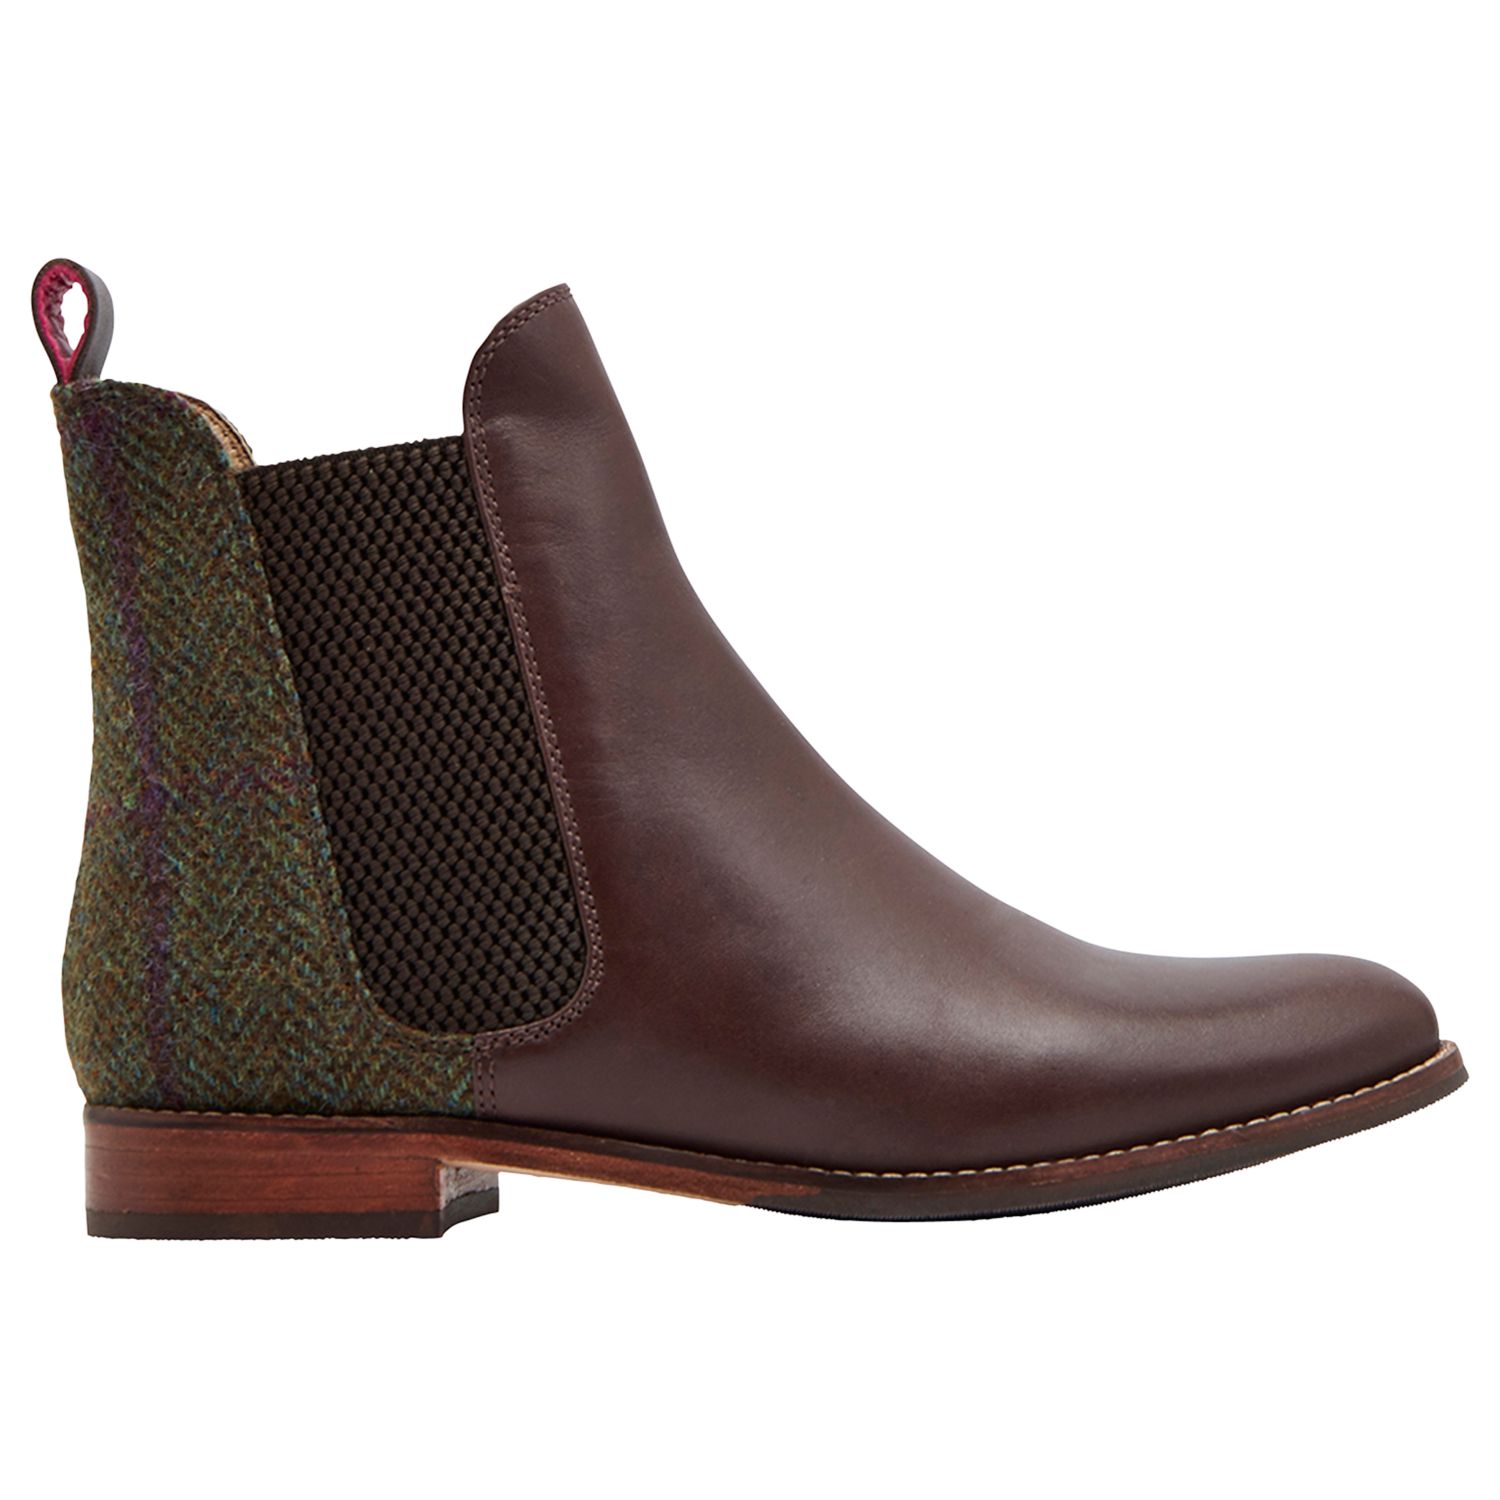 Joules Chelsea Boots, Brown, 5